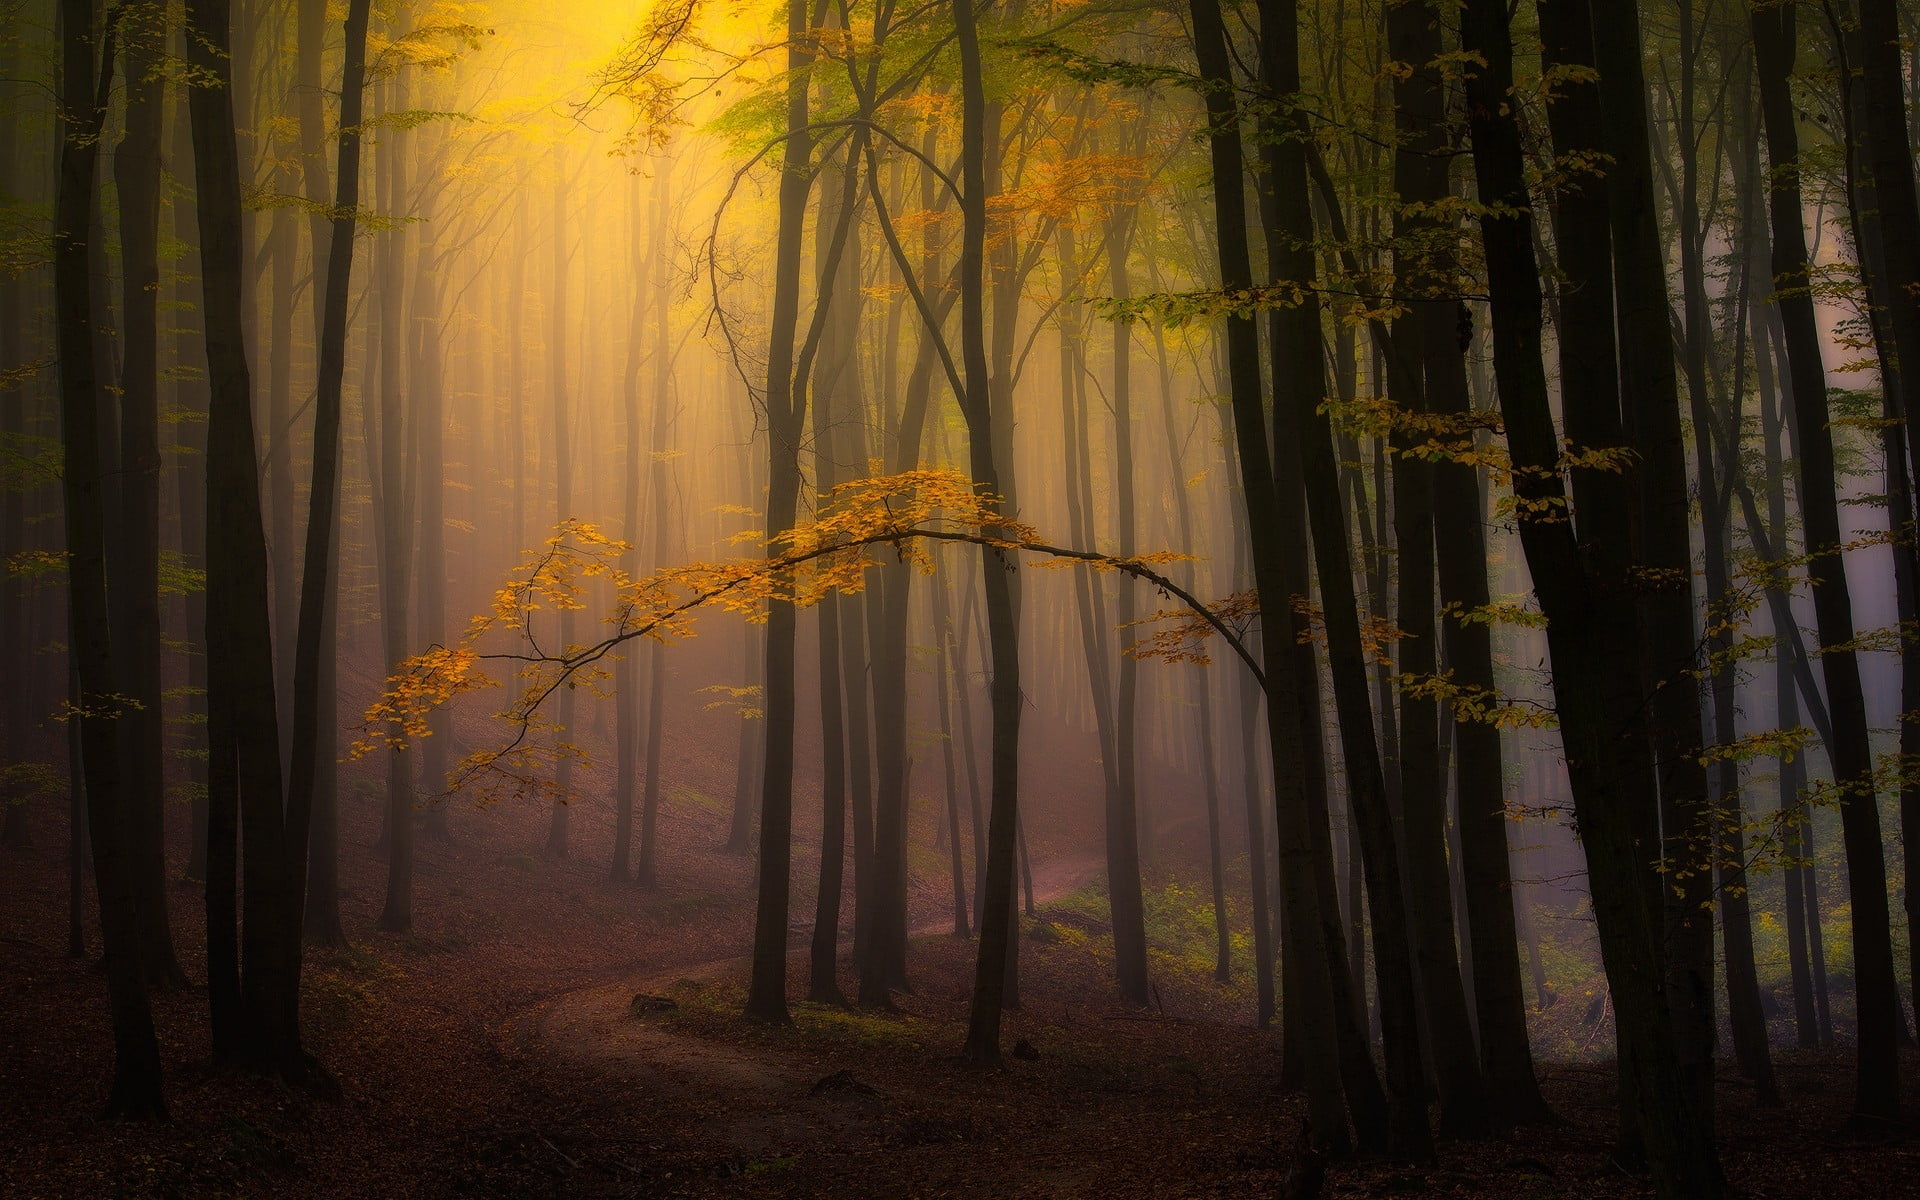 yellow leafed trees, nature, landscape, fall, mist, forest, leaves